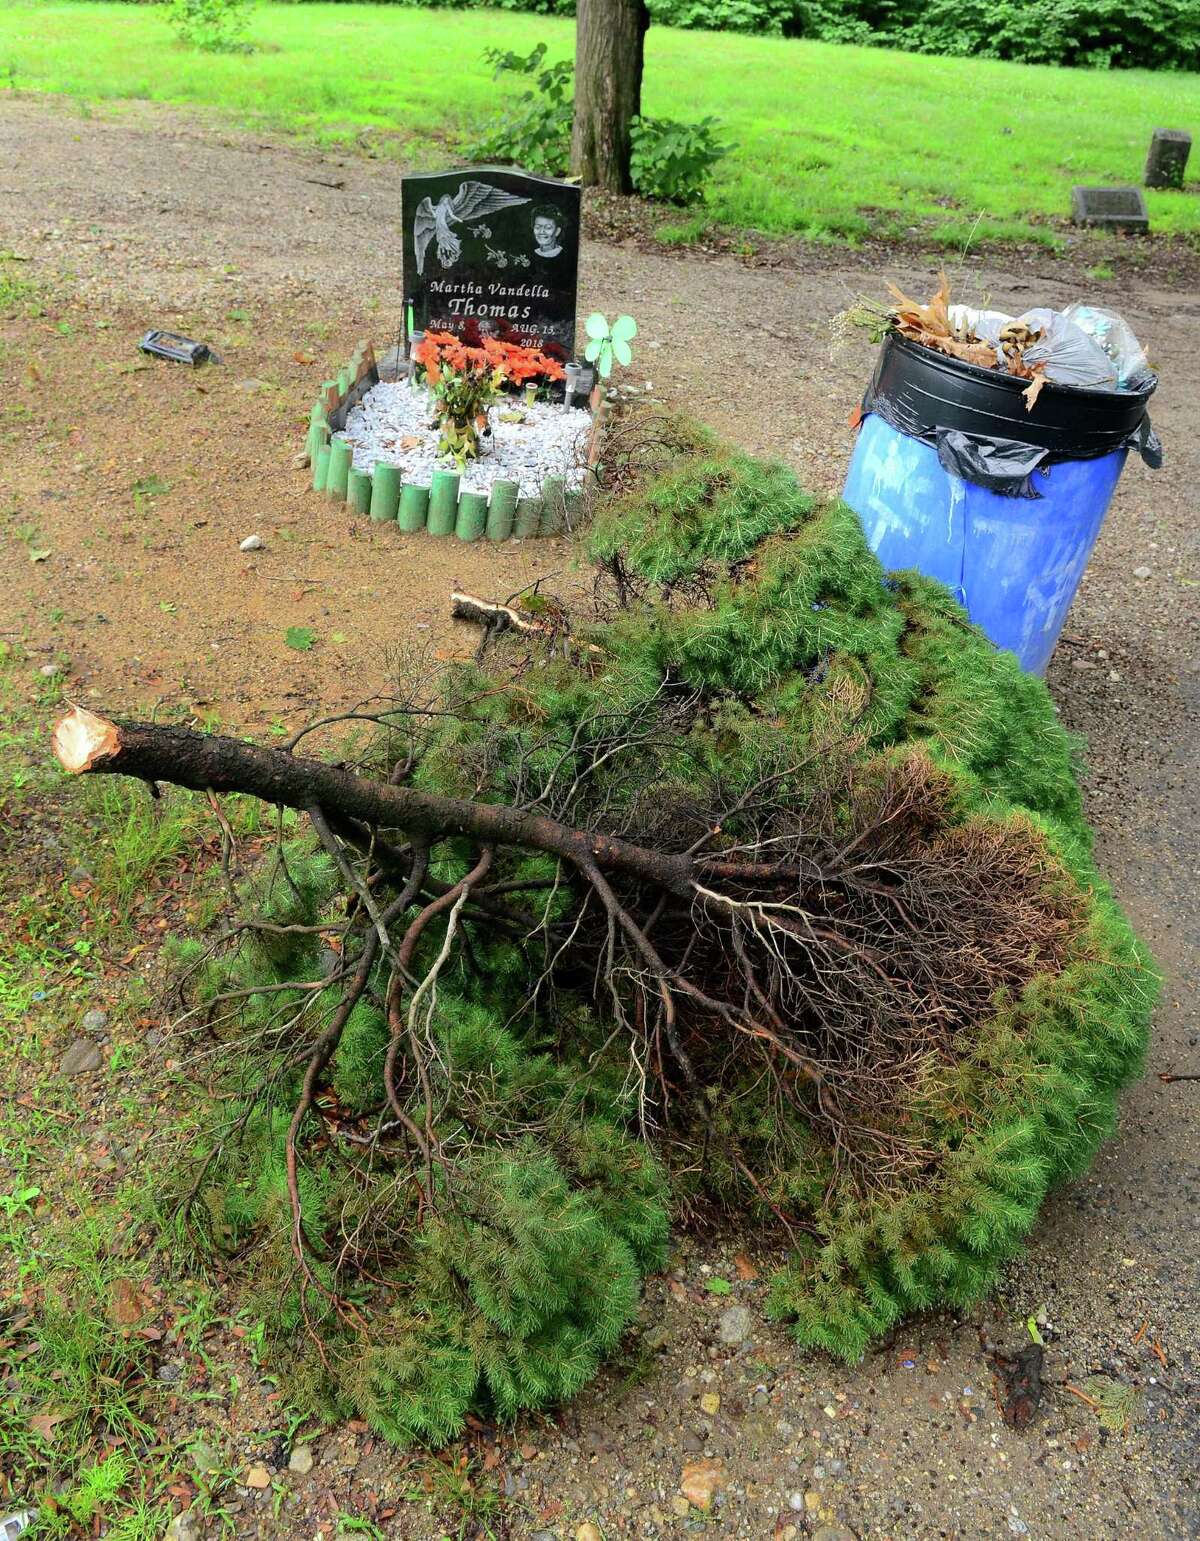 A trash can and cut tree rest near a lone head stone at Park Cemetery in Bridgeport, Conn., on Tuesday June 25, 2019.